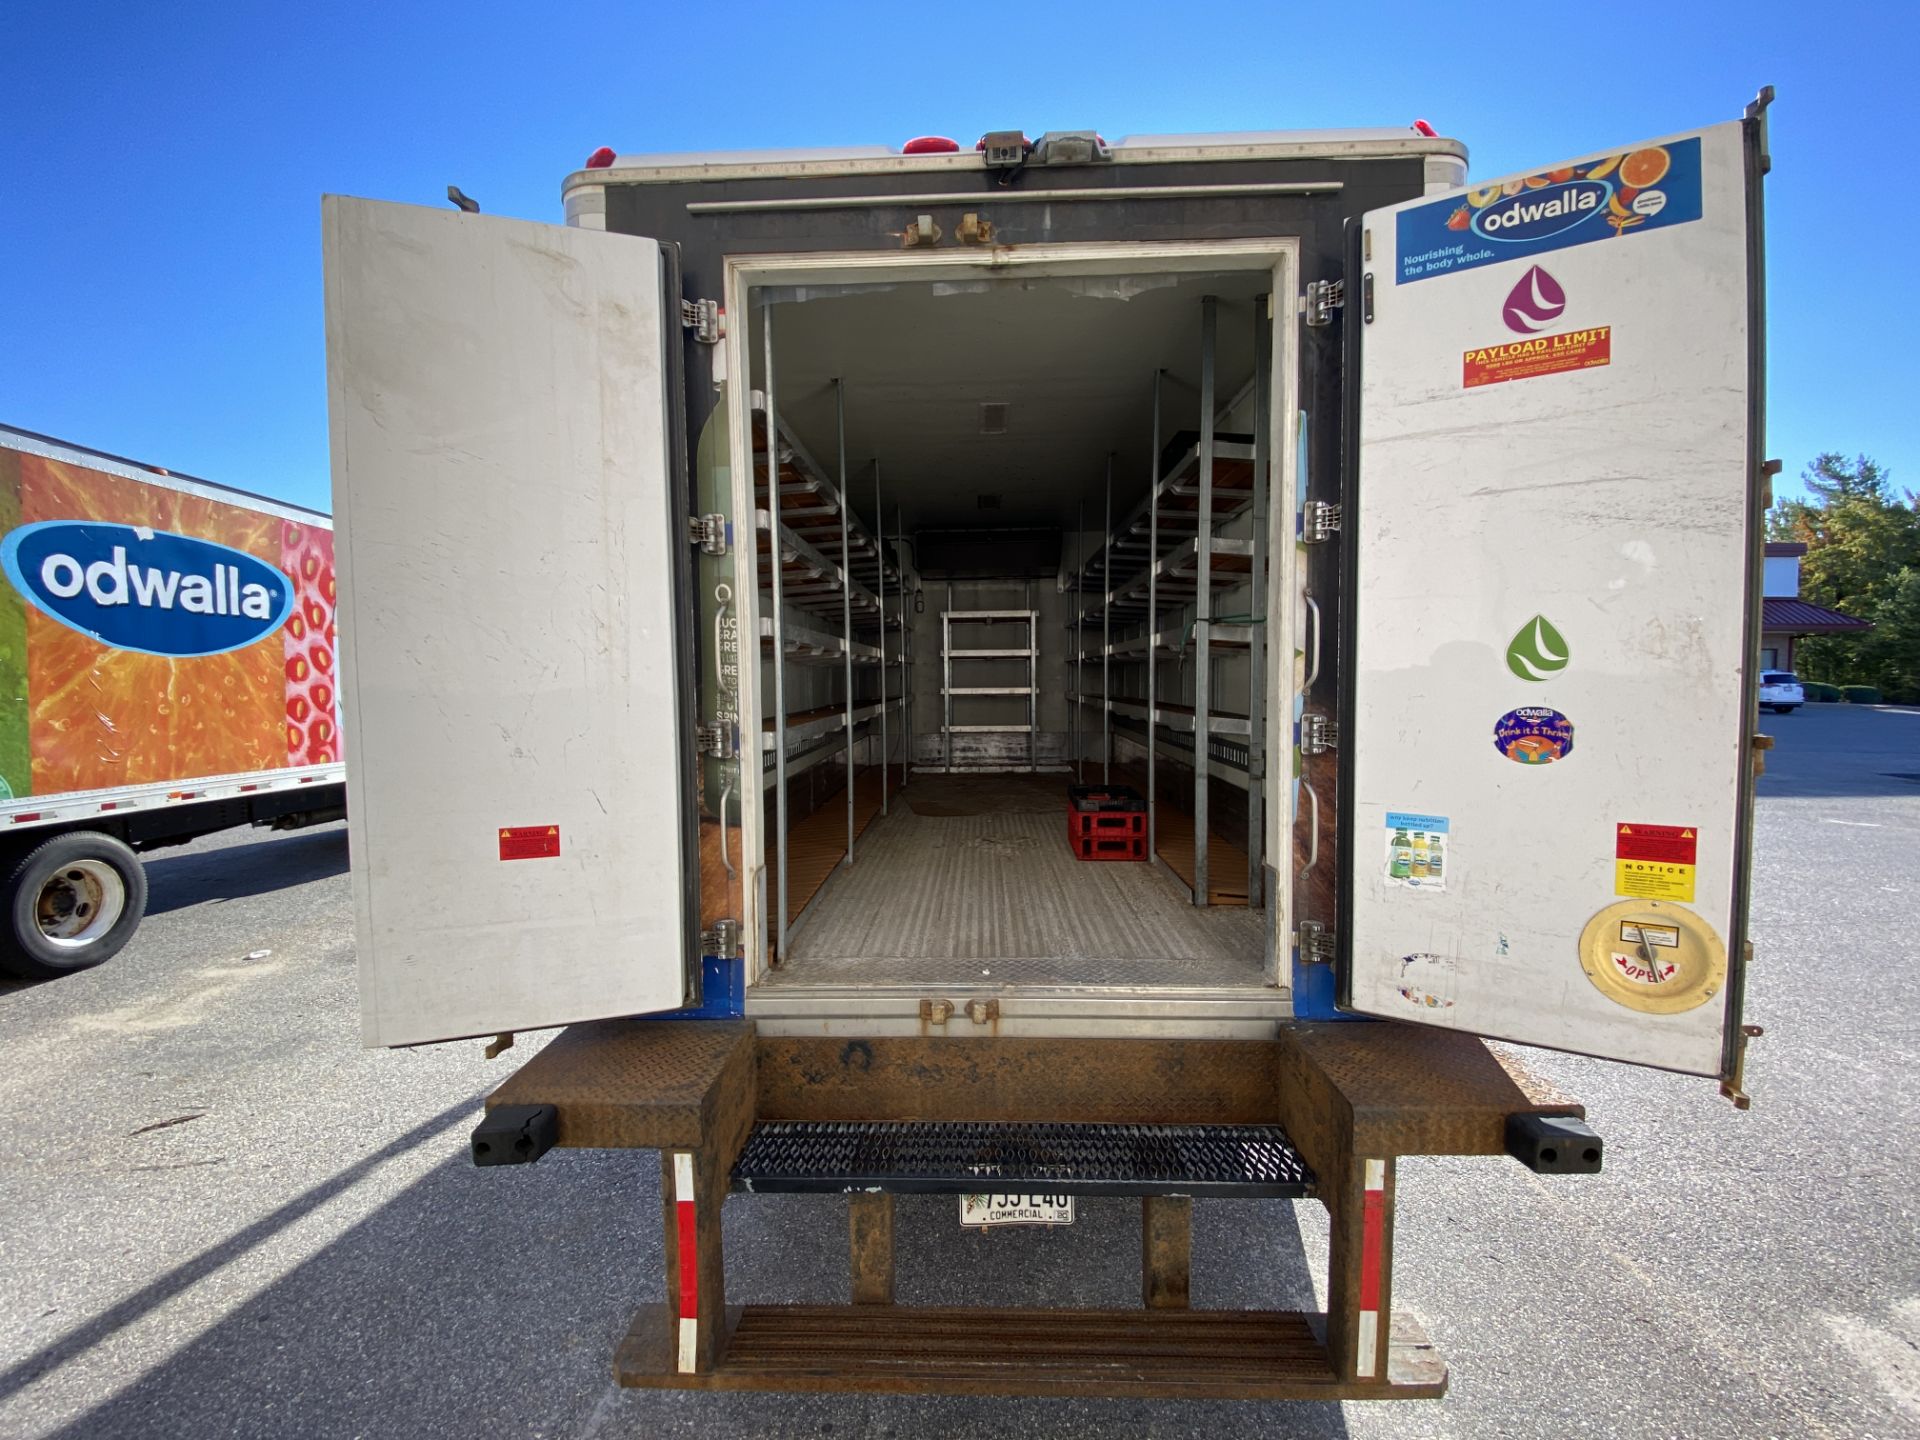 2015 Freightliner refrigerated truck - Image 5 of 8